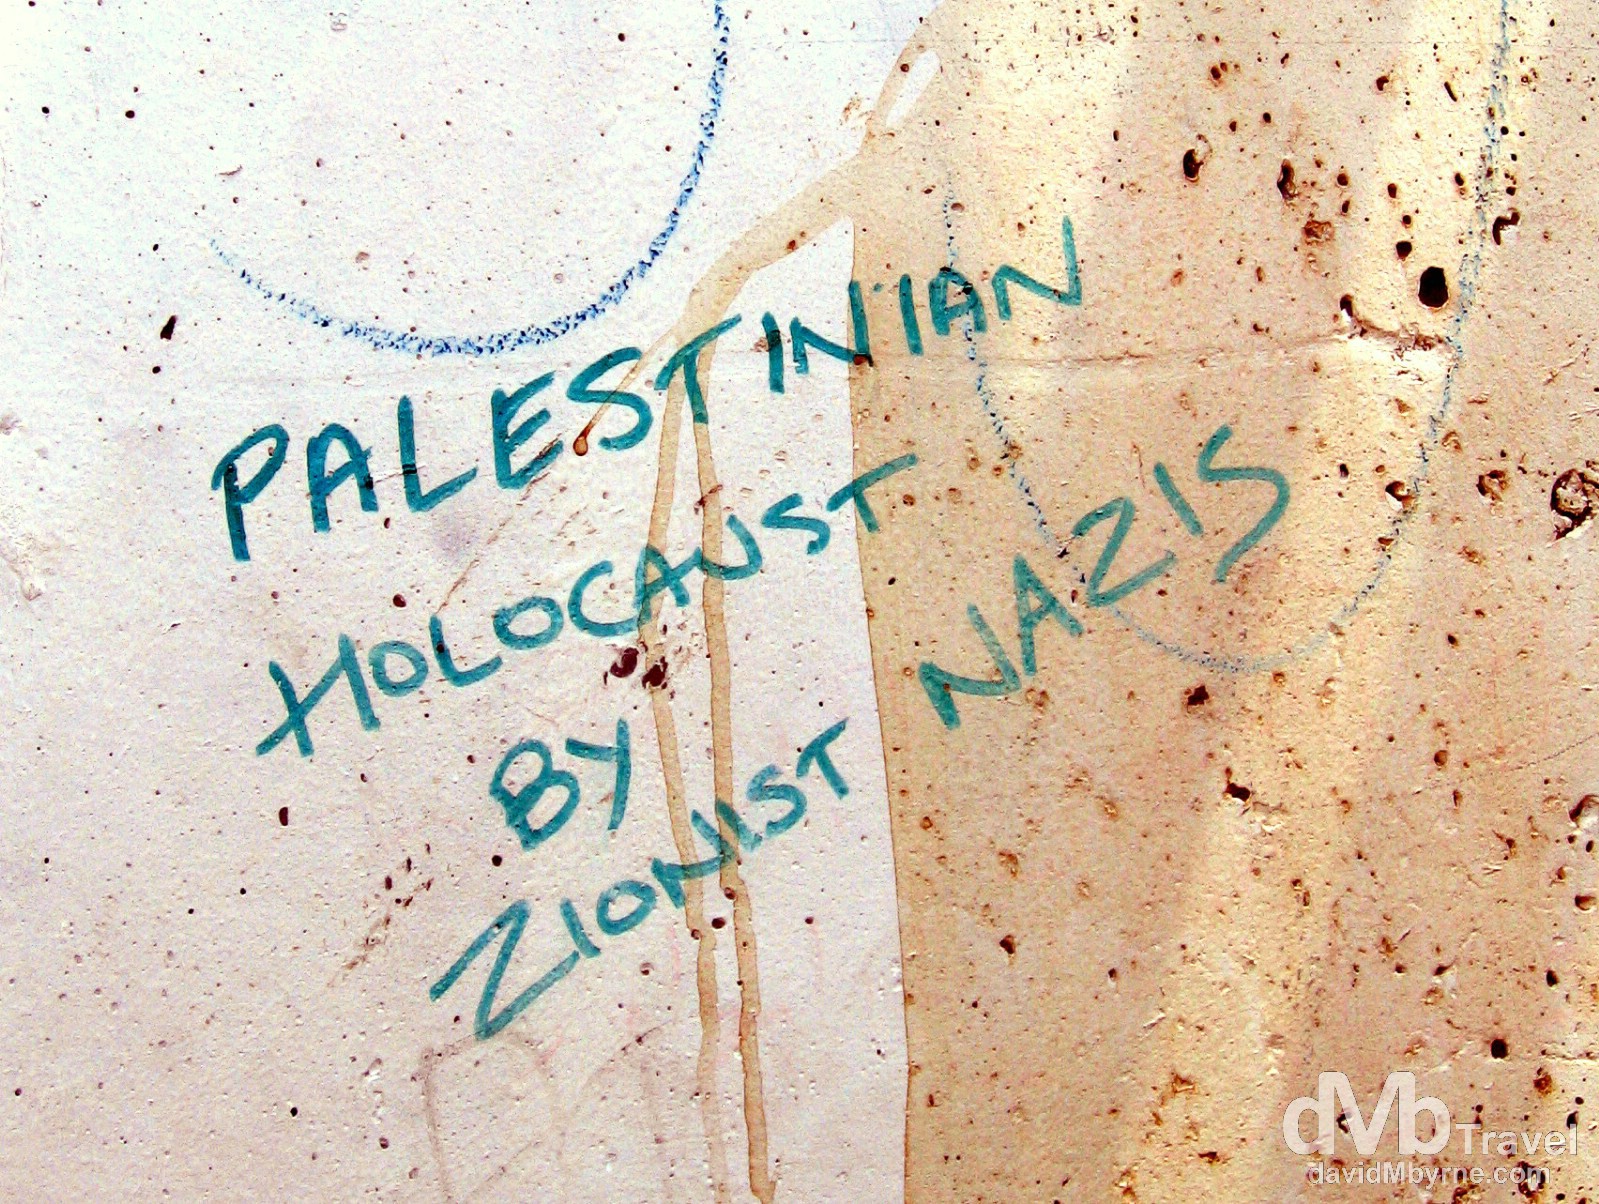 Palestinian Holocaust. A section of the heavily guarded wall separating the Palestinian West Back from Israel. May 2, 2008. 